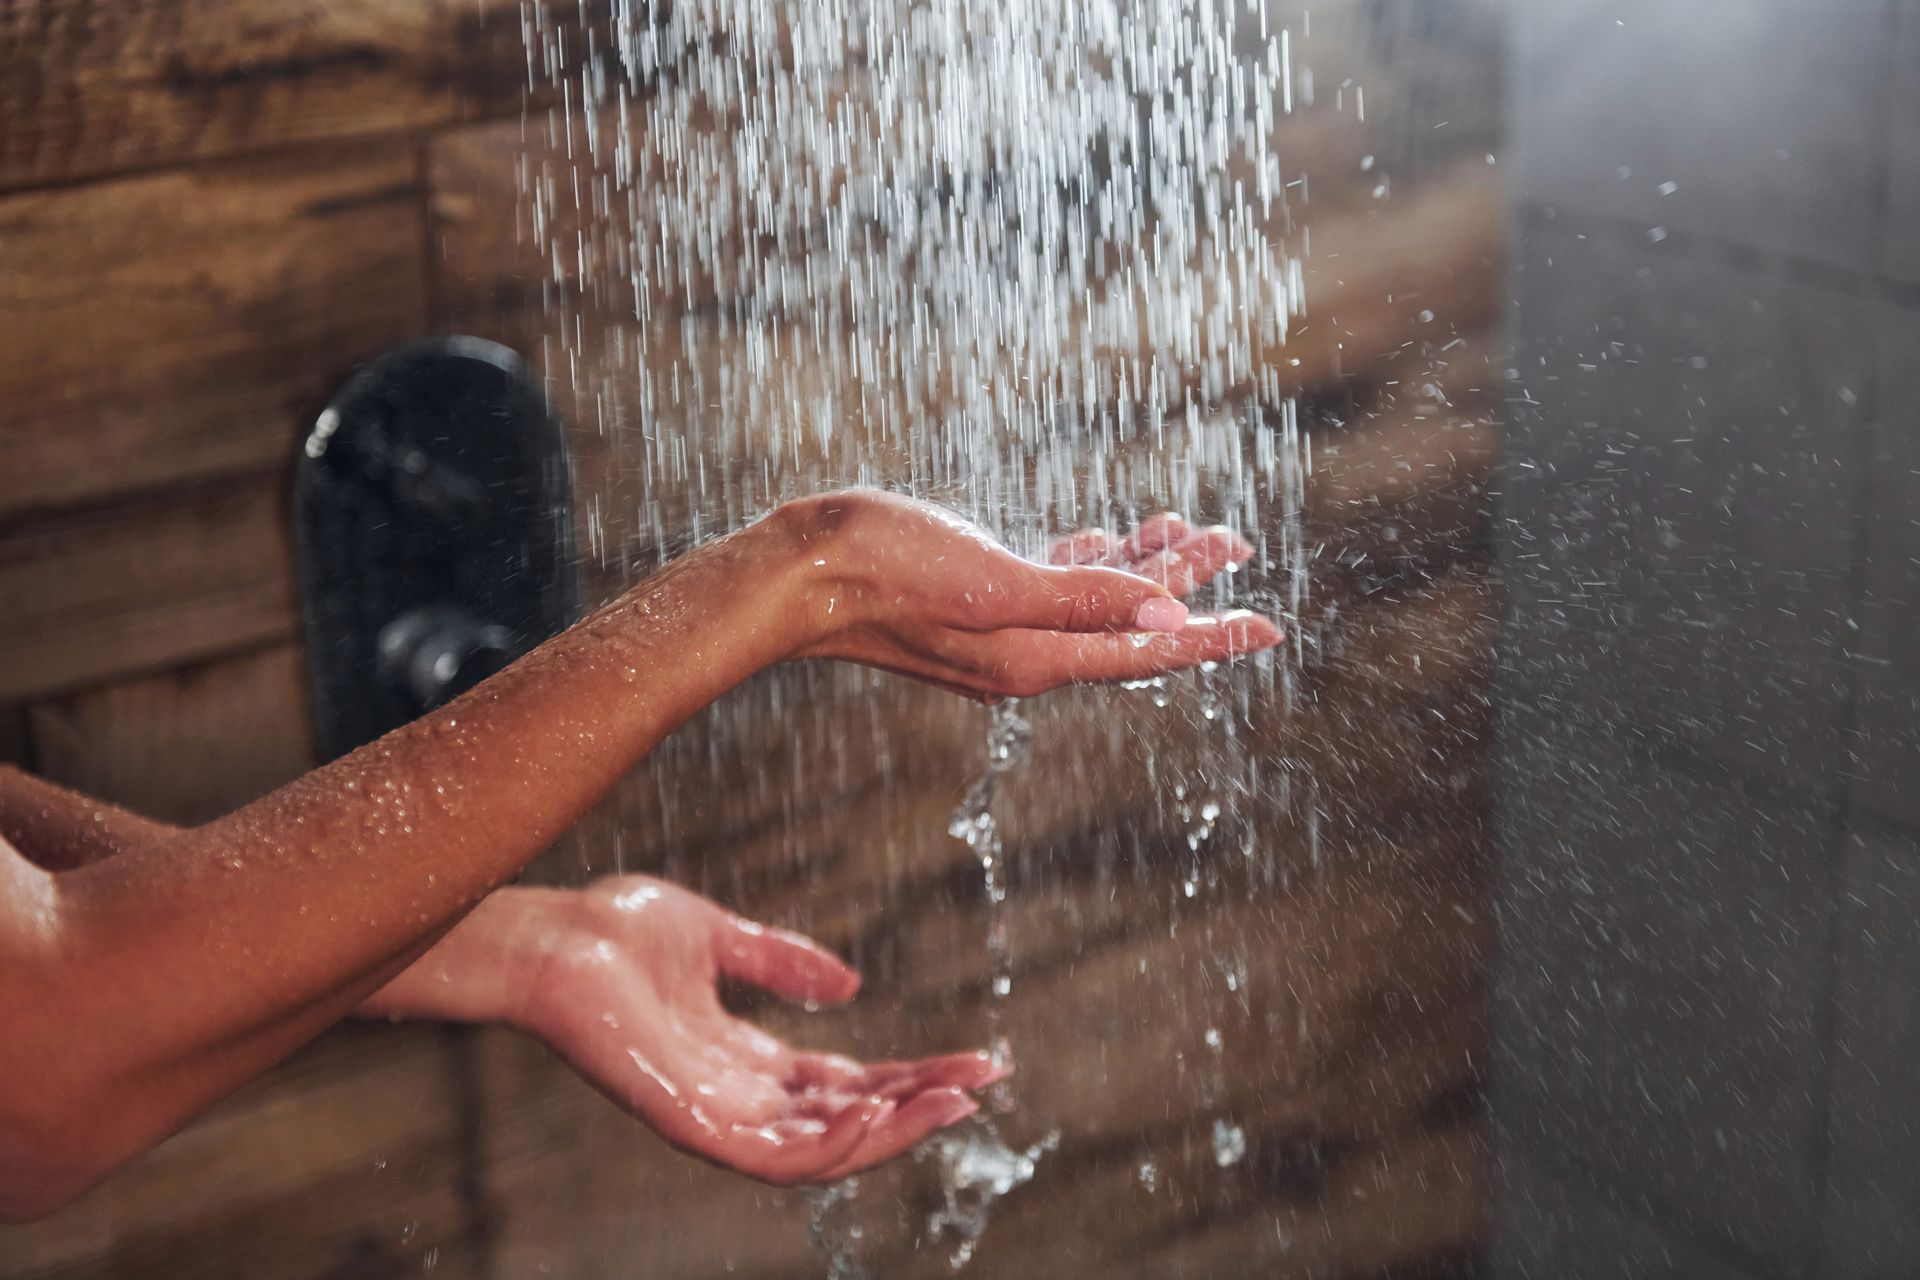 We discuss how soft water can help you feel more clean in a shower.